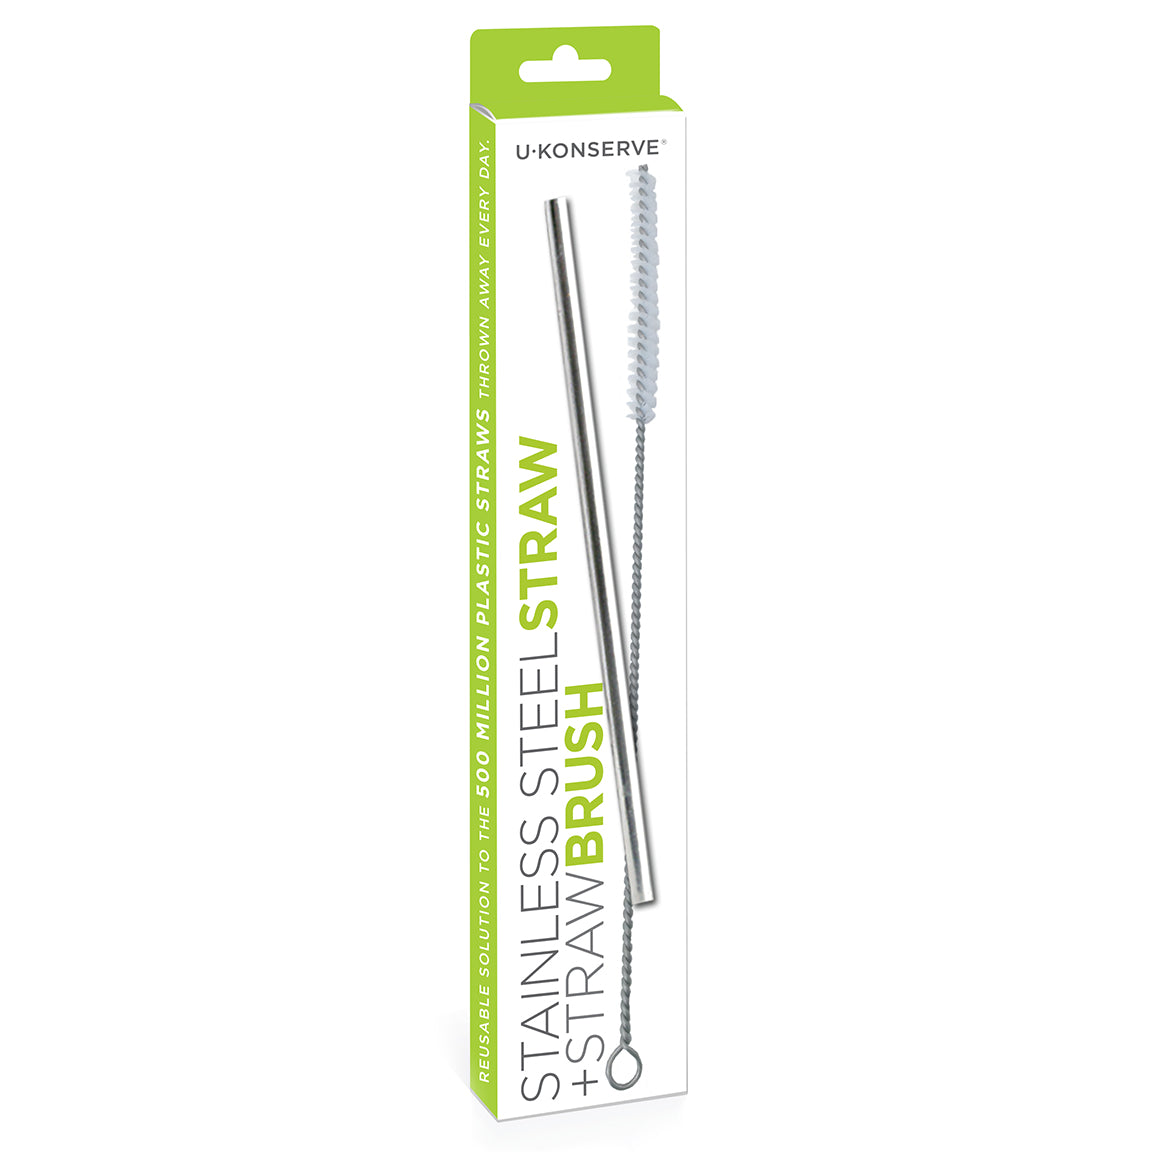 Straws-10.5 Stainless Steel in 5 colors